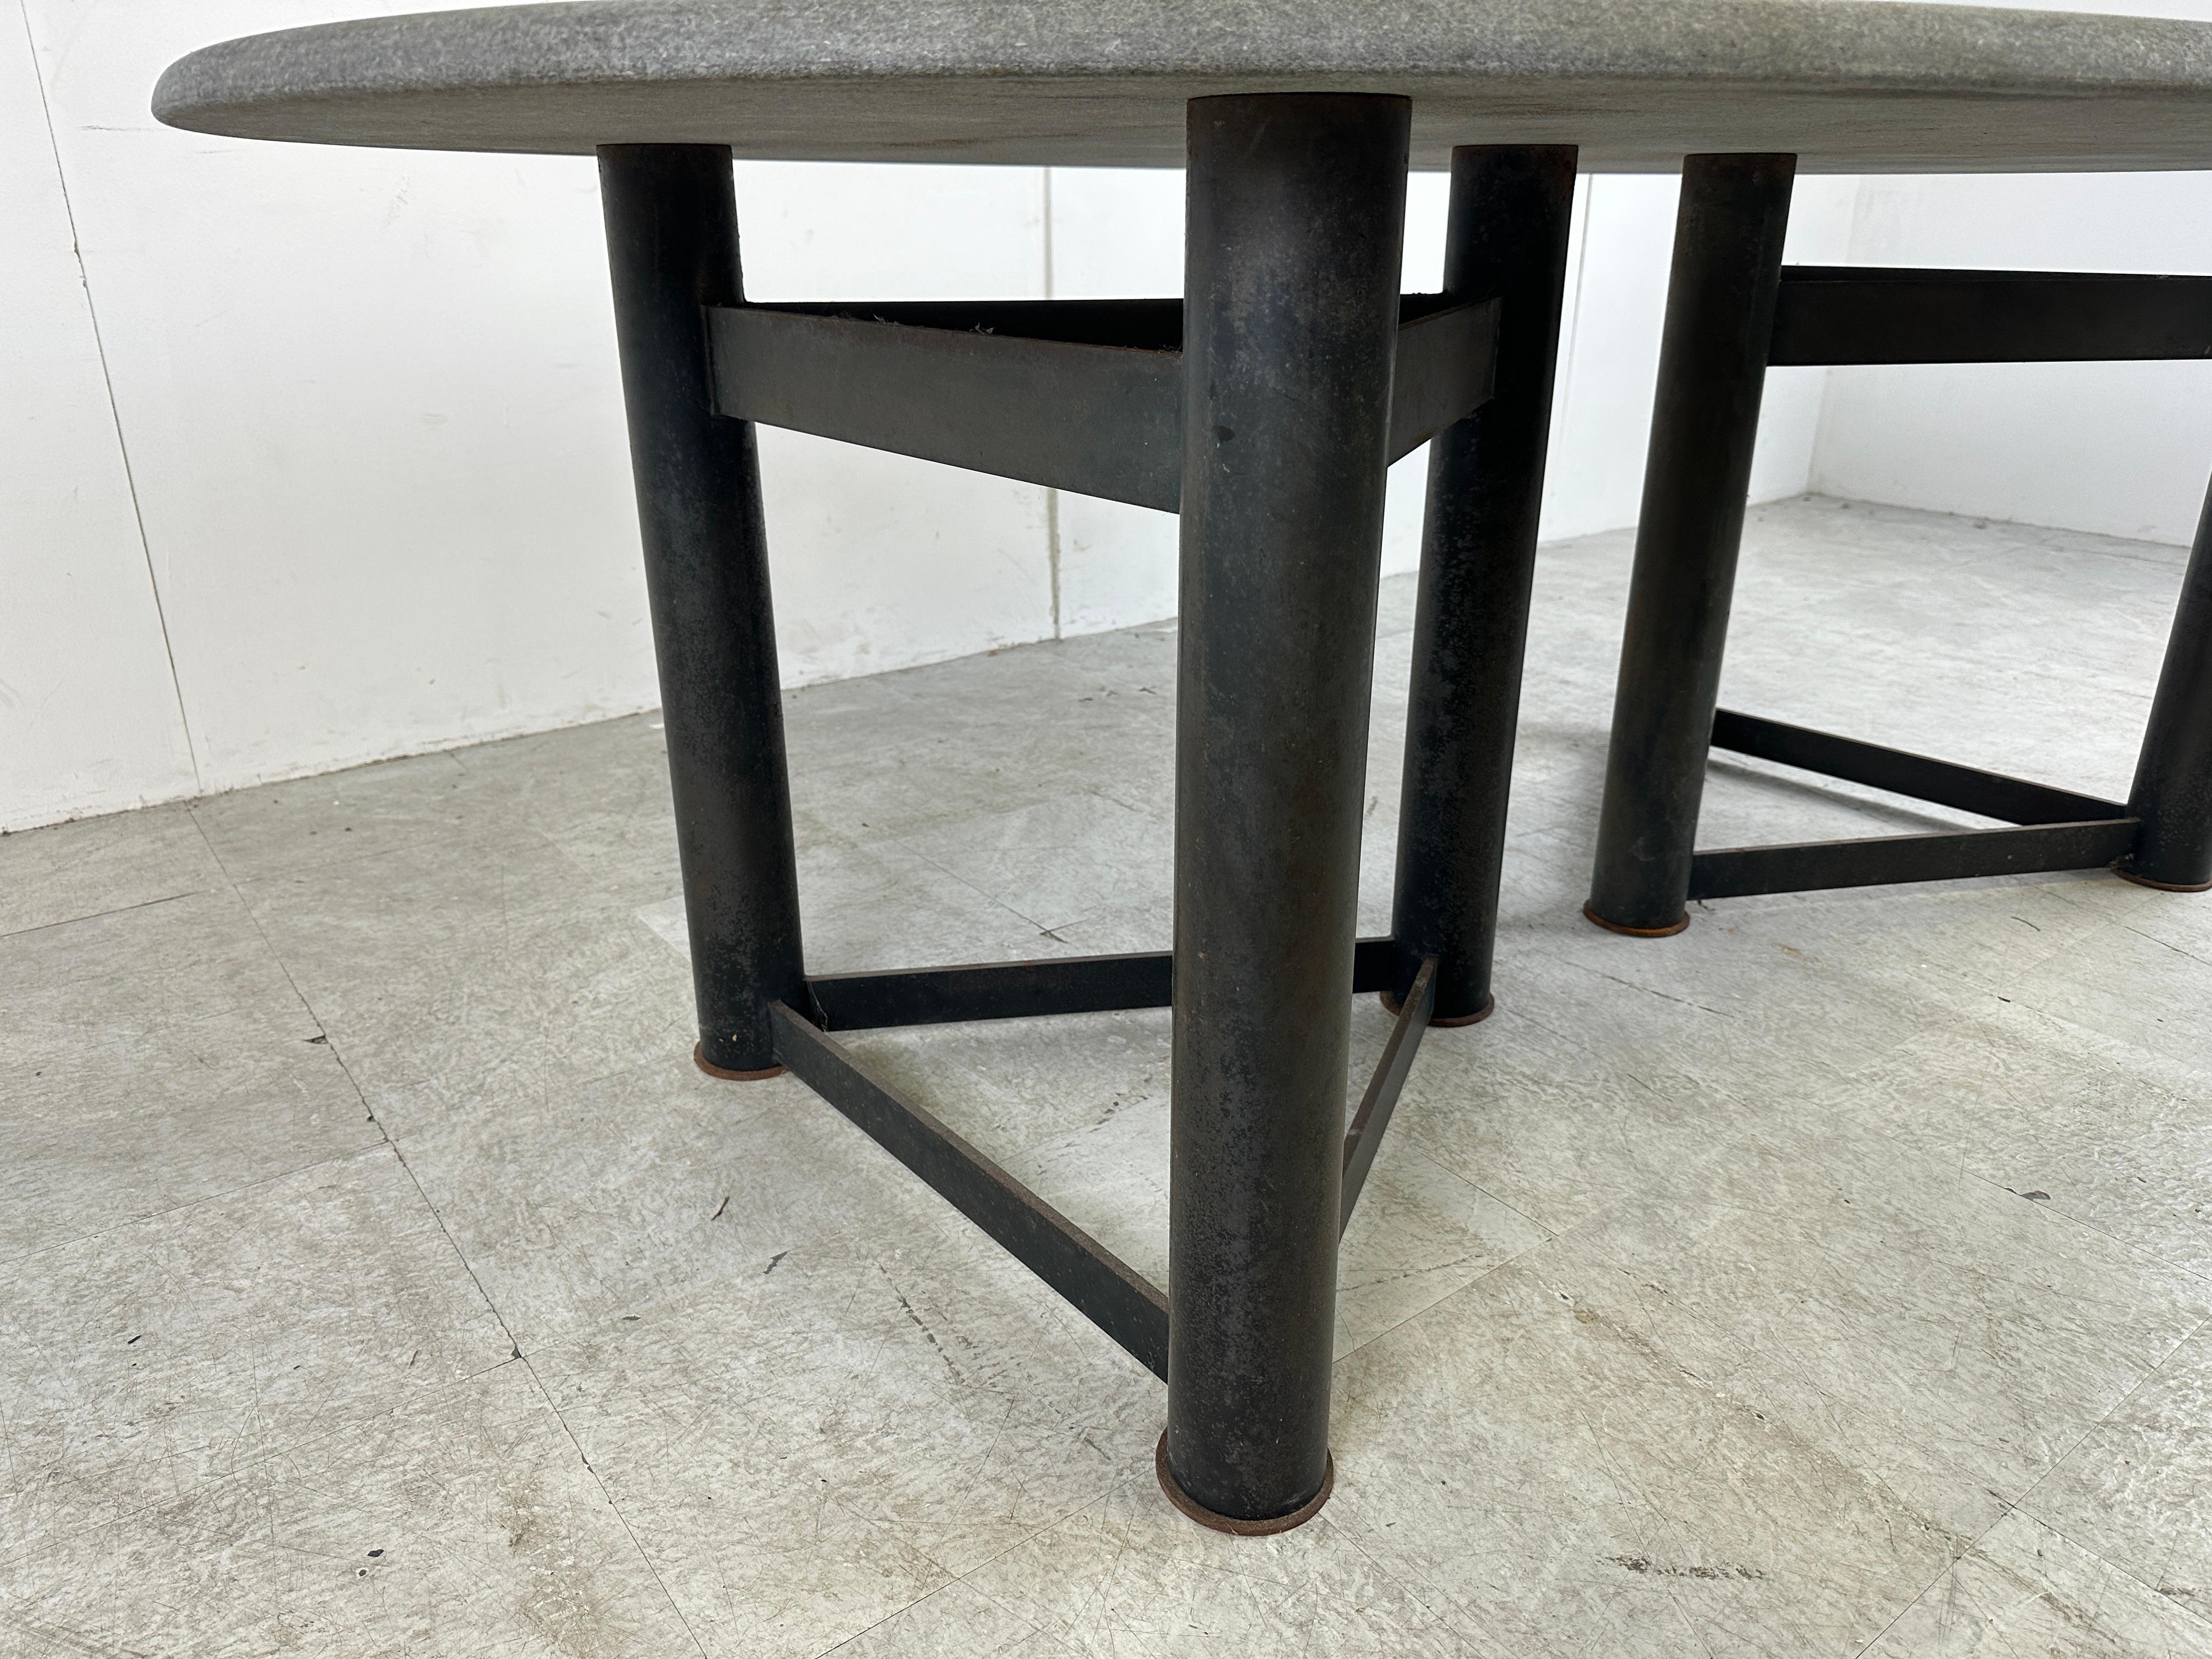 Vintage oval stone top dining table with a double tripod black metal base in the manner of Jan Vlug.

Beautiful timeless piece.

The stone top is nicely finished.

Good condition

1970s

Dimensions:
Height: 74cm/29.13